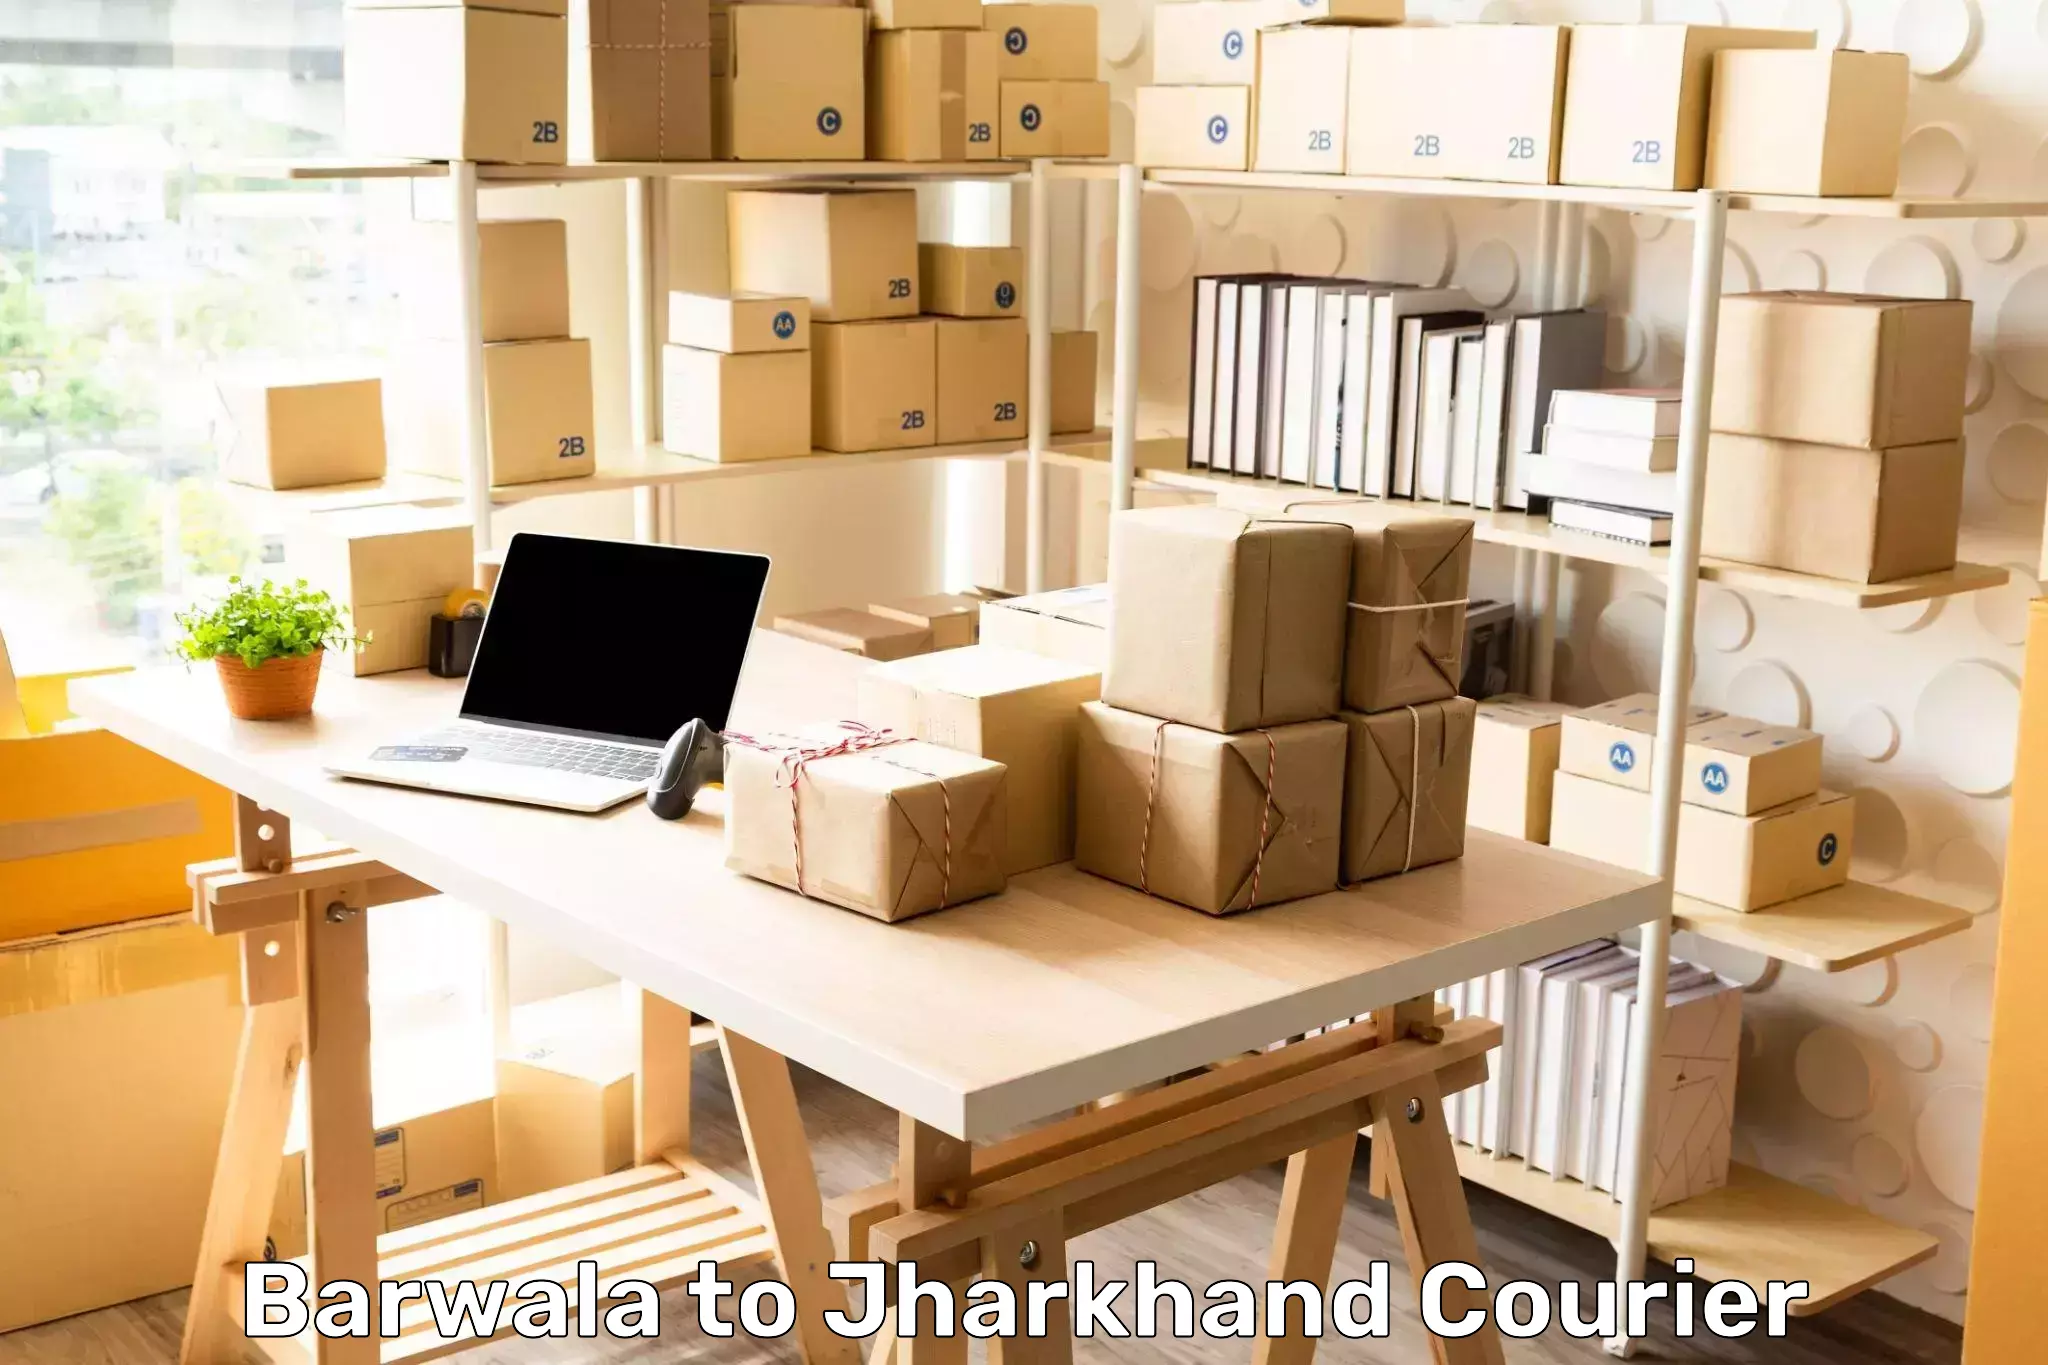 Local courier options in Barwala to Jamshedpur